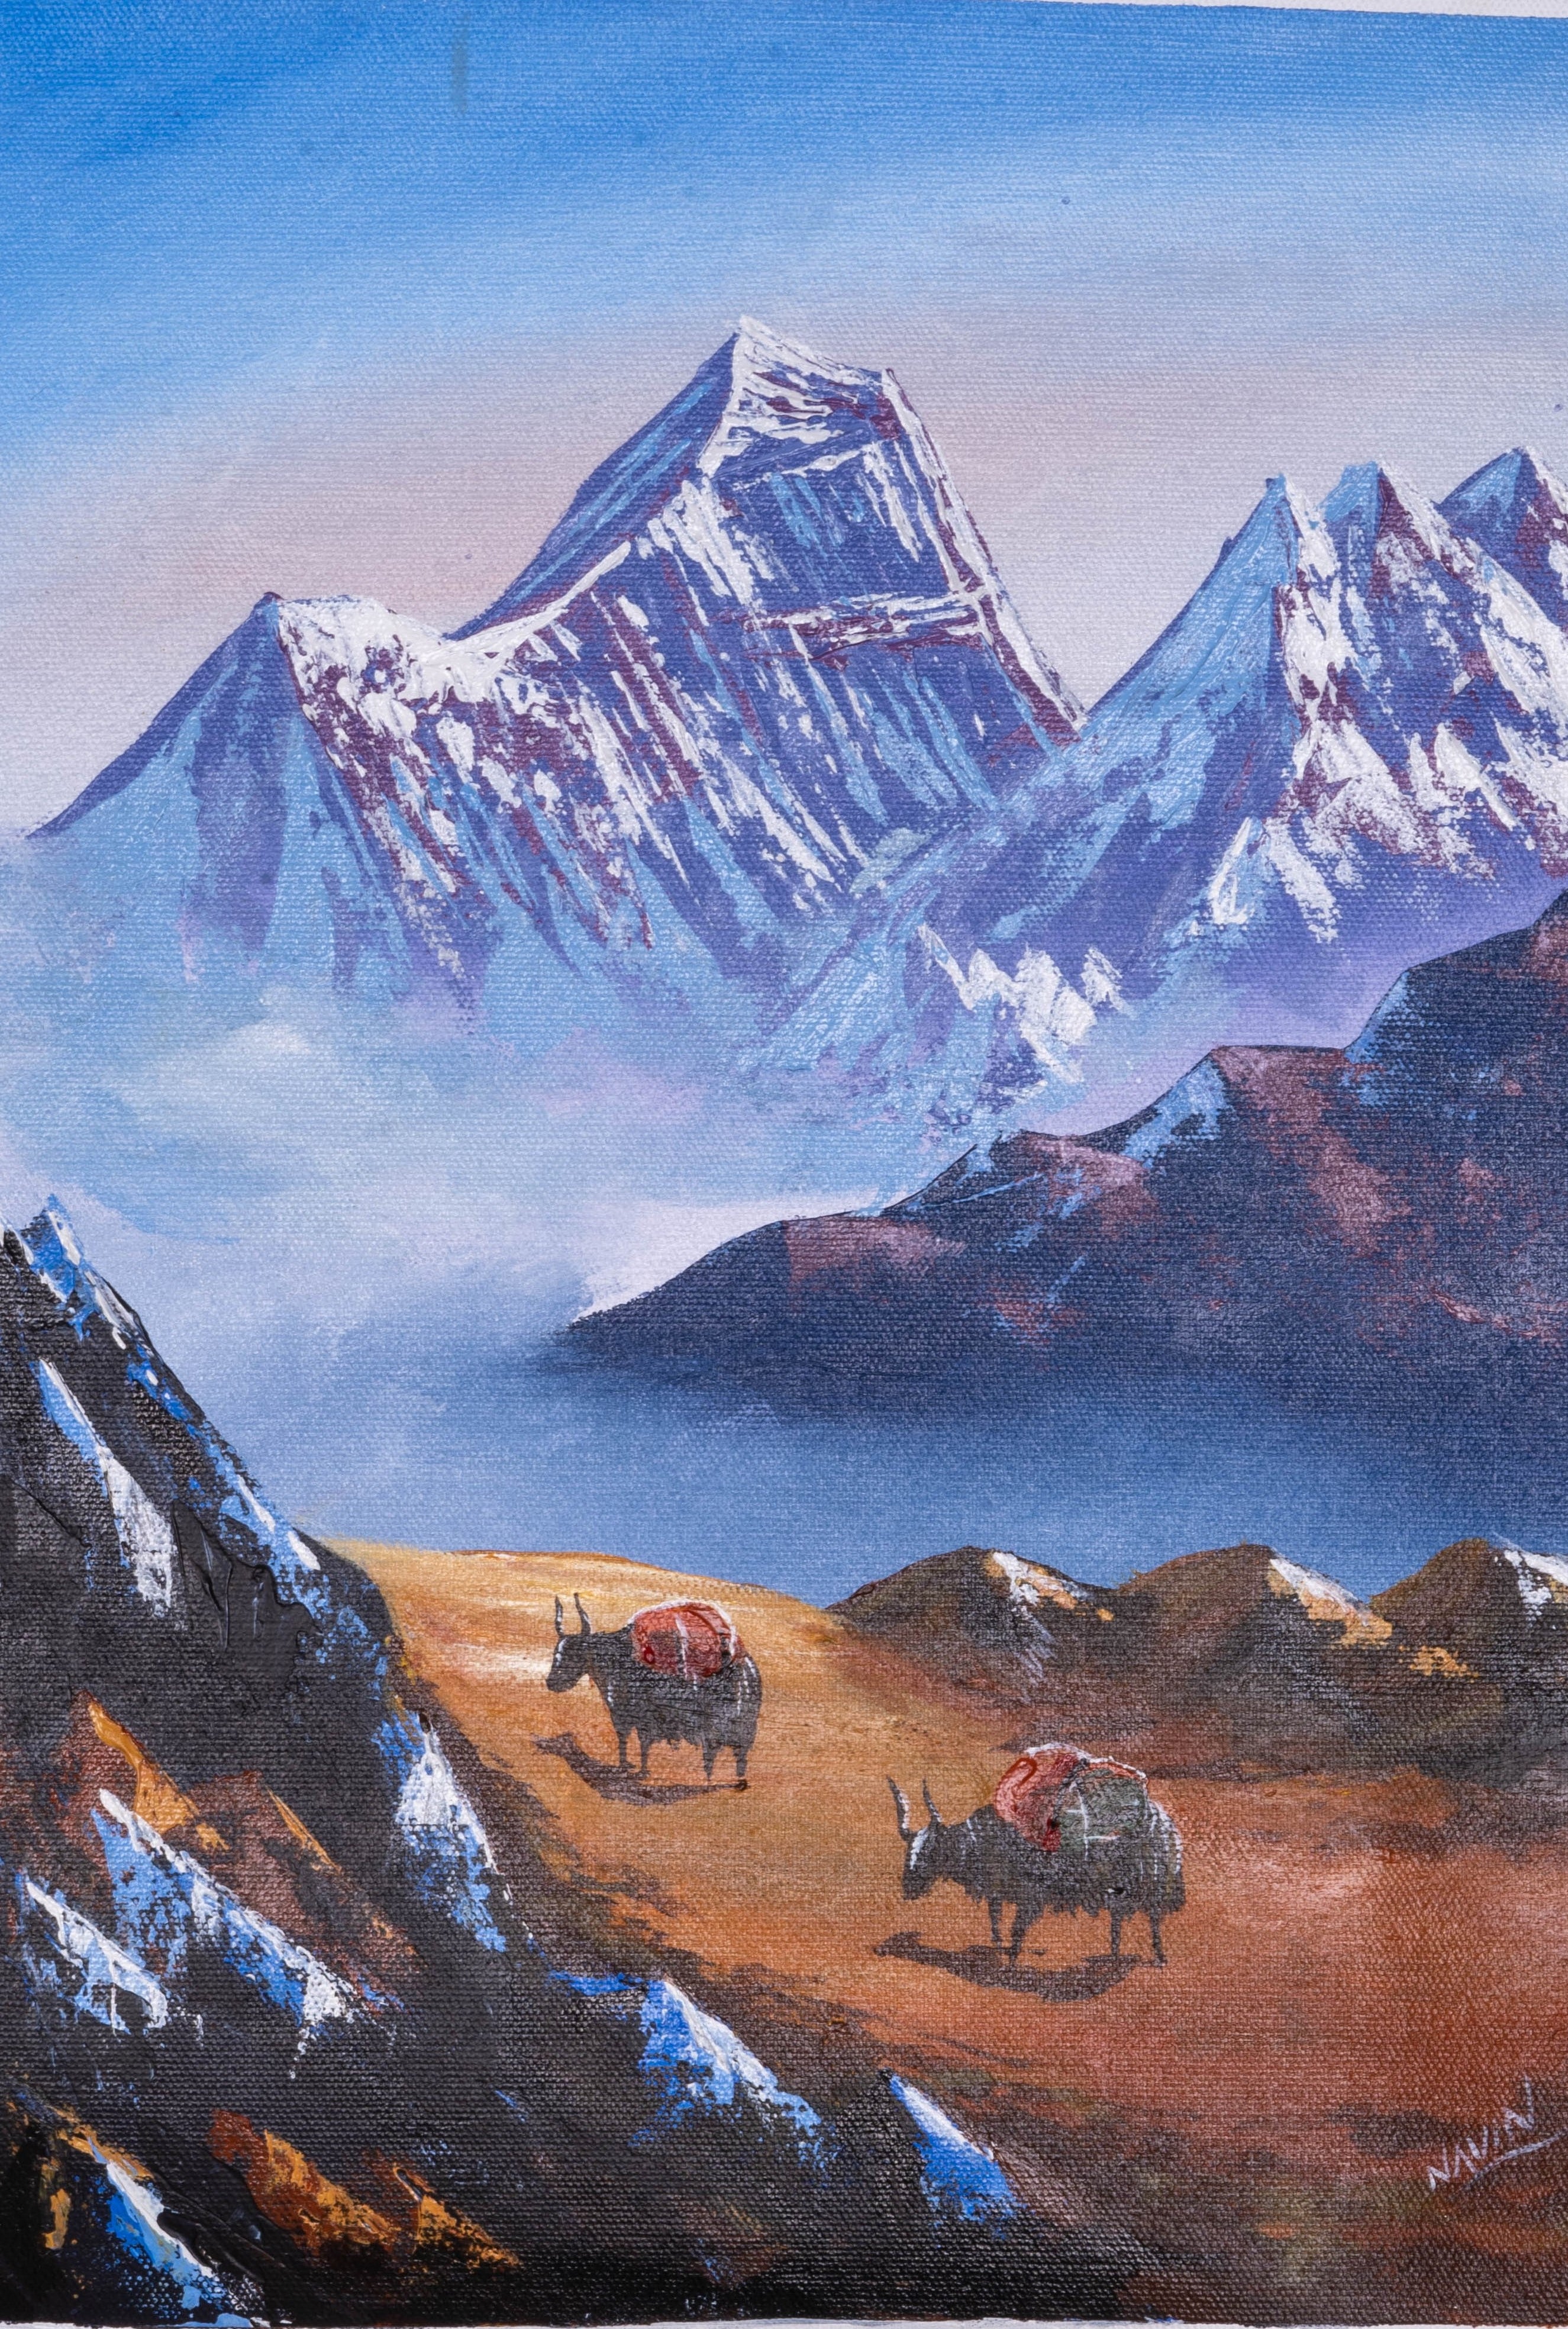 Oil Painting of Mount Everest - Yaks on their way - Lucky Thanka